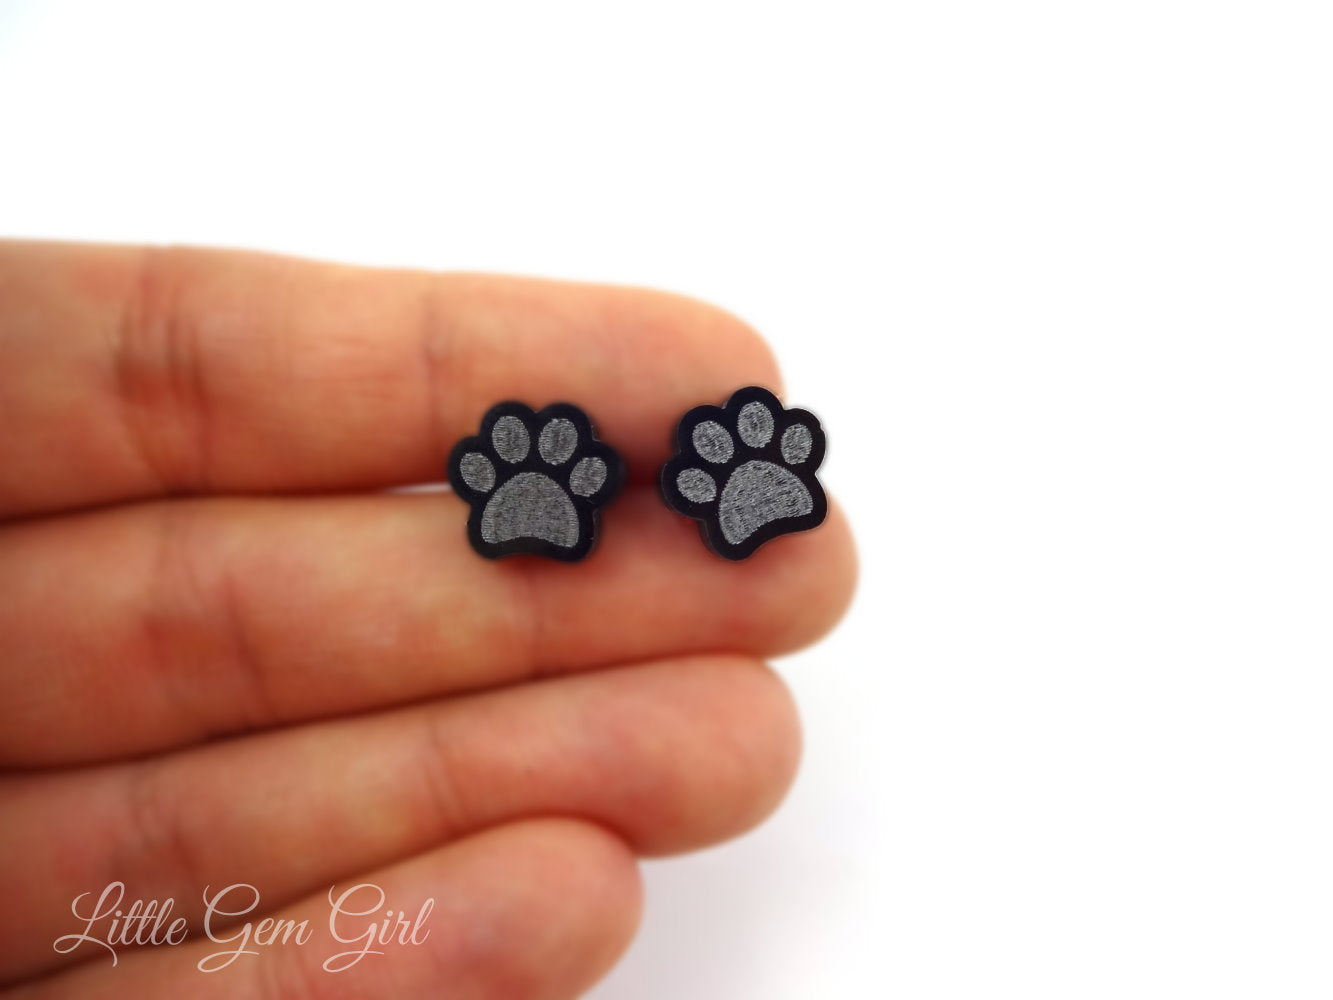 Paw Print Earrings Available with Titanium or Stainless Steel Post - Animals, Dog, Cat Black Pawprint Stud Earrings